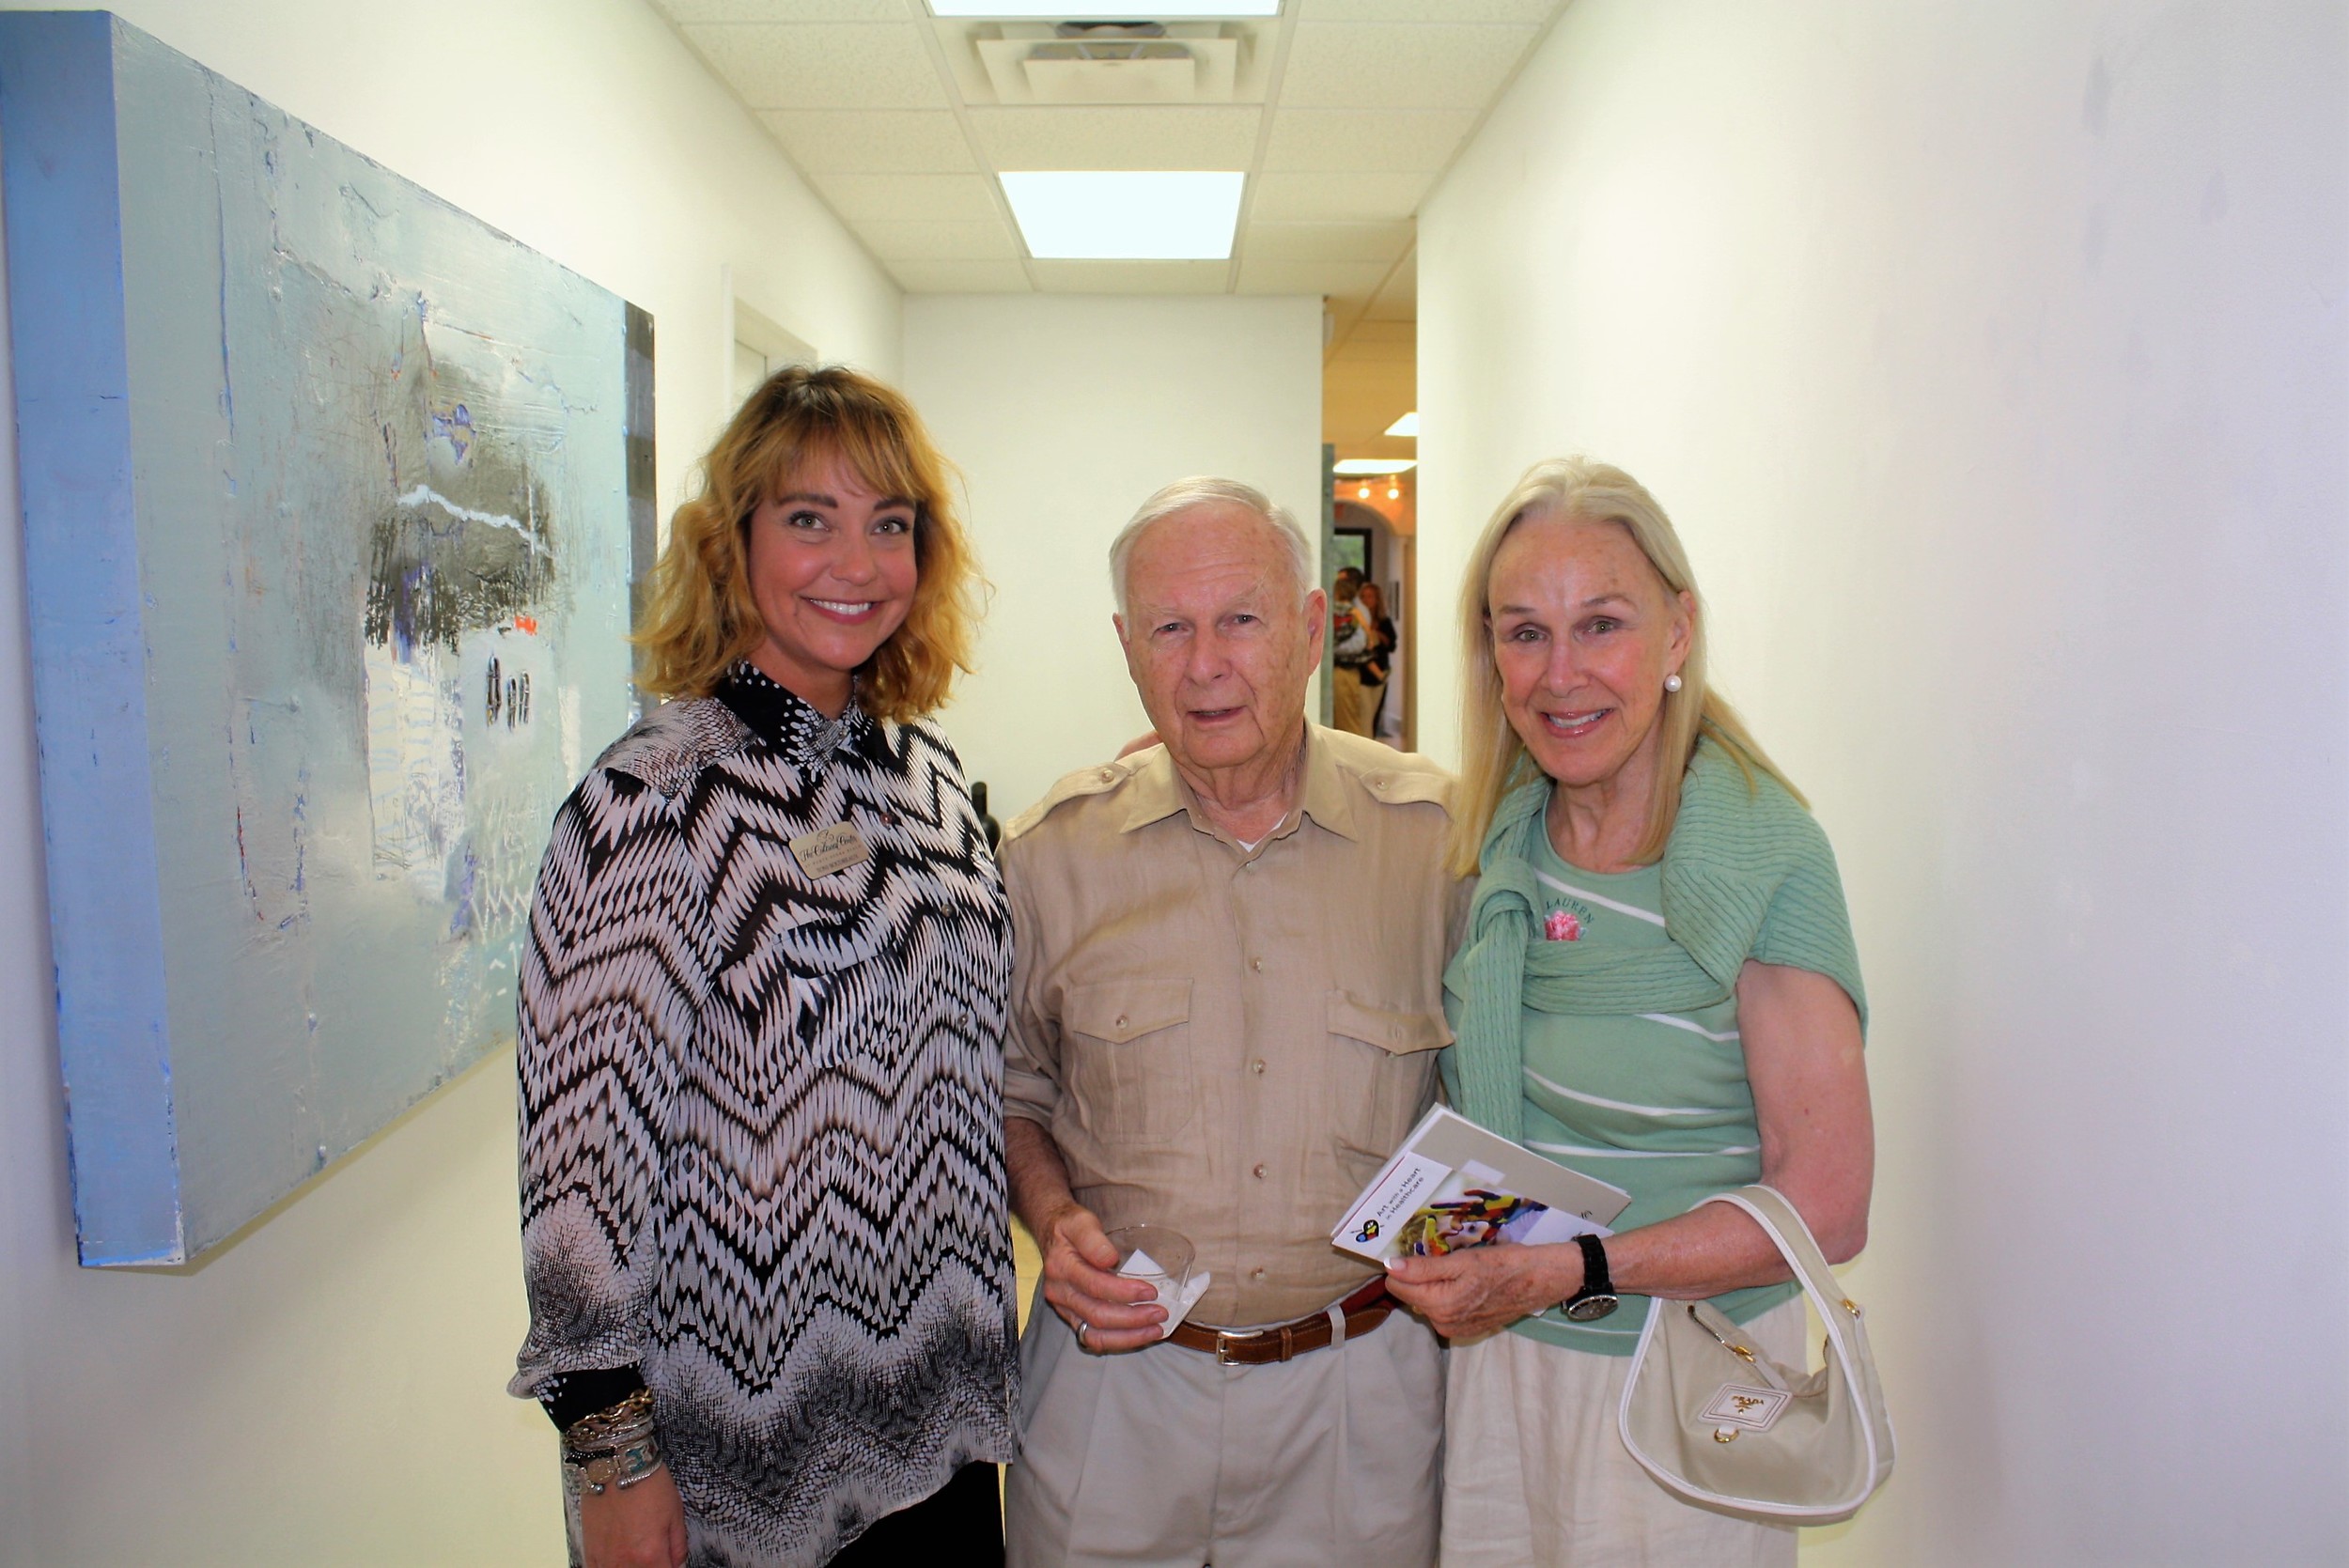 Cultural Center Development Director Toni Boudreaux, Gerry Maloney and Marilyn McAfee